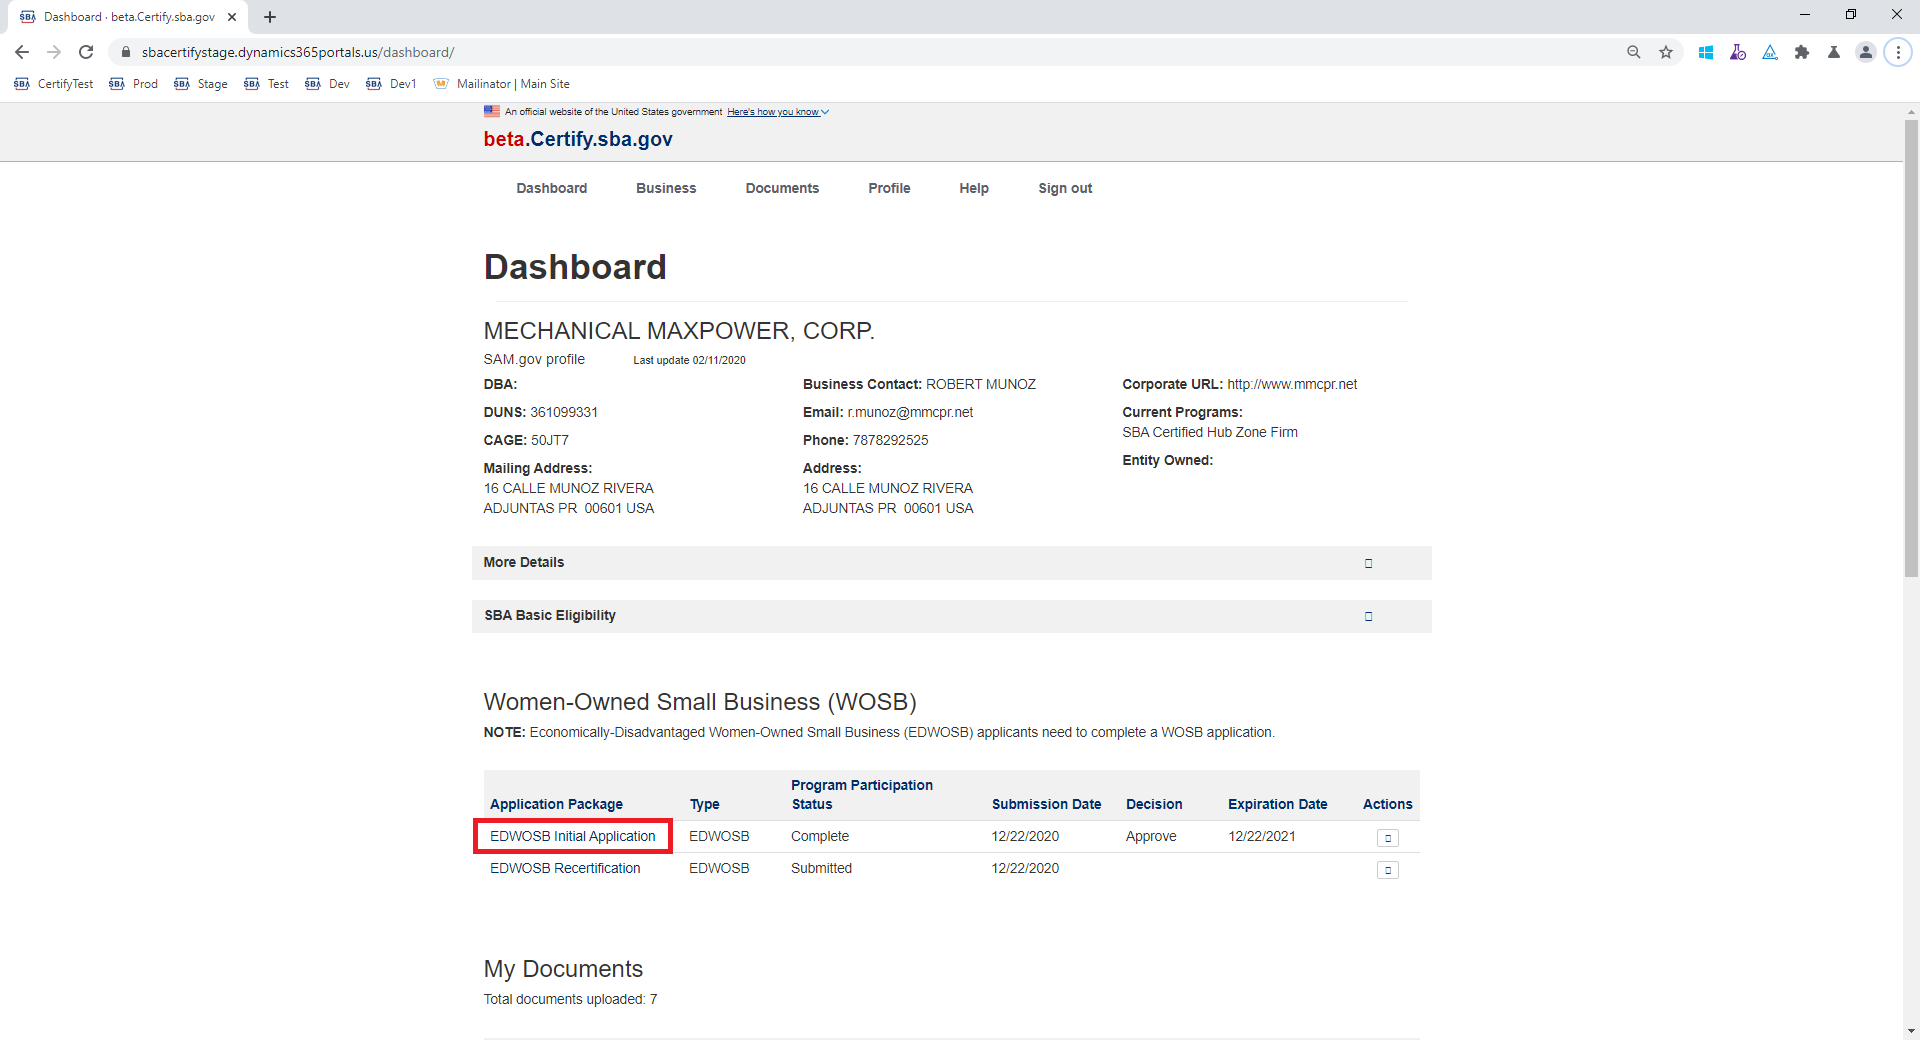 An Image showing a sample firms Dashboard in beta.certify.sba.gov. It highlights the link EDWSOB Initial Application to begin an Annual Update.